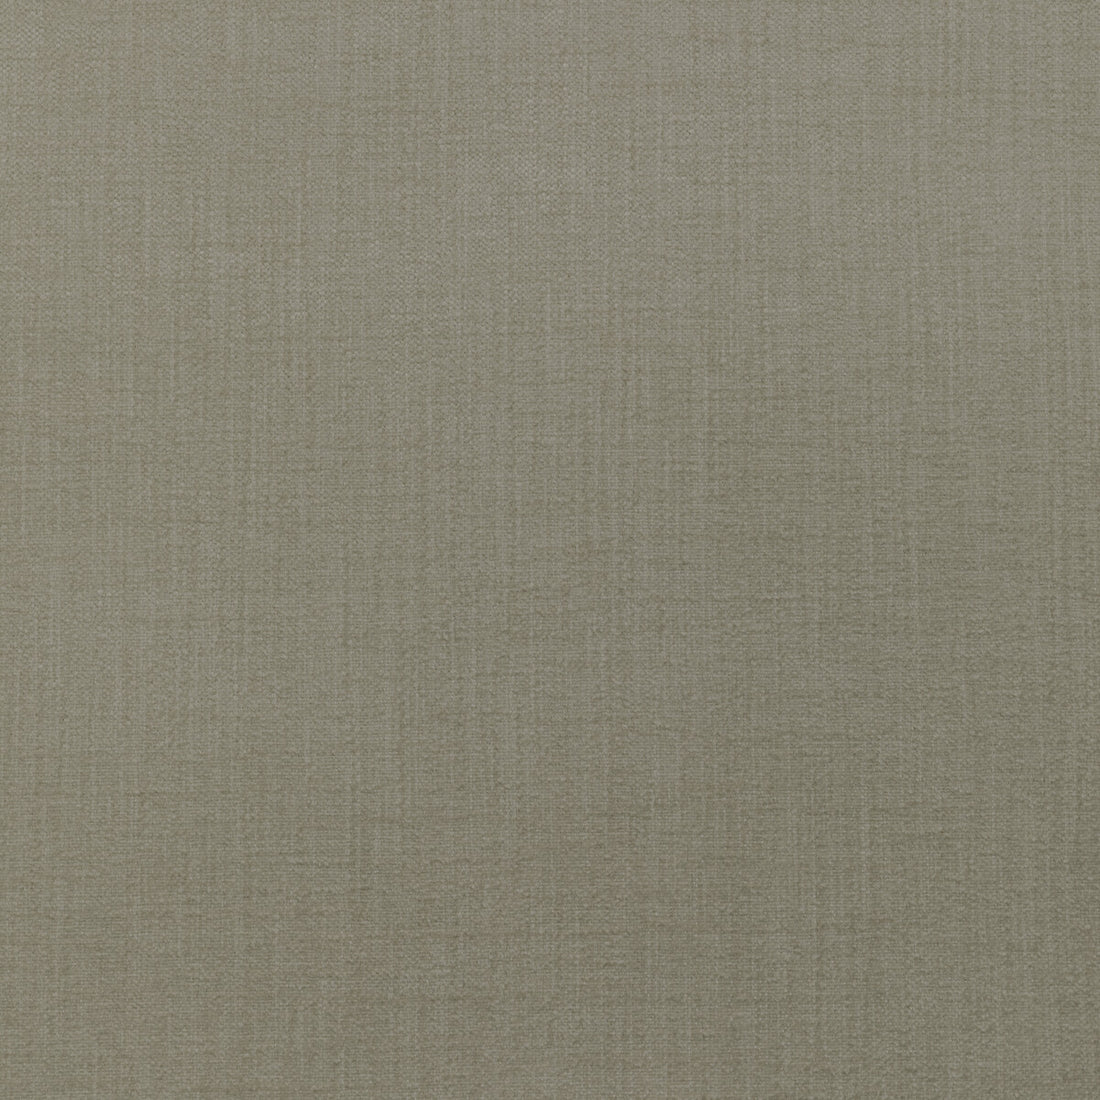 Accommodate fabric in pumice color - pattern 36255.106.0 - by Kravet Contract in the Supreen collection